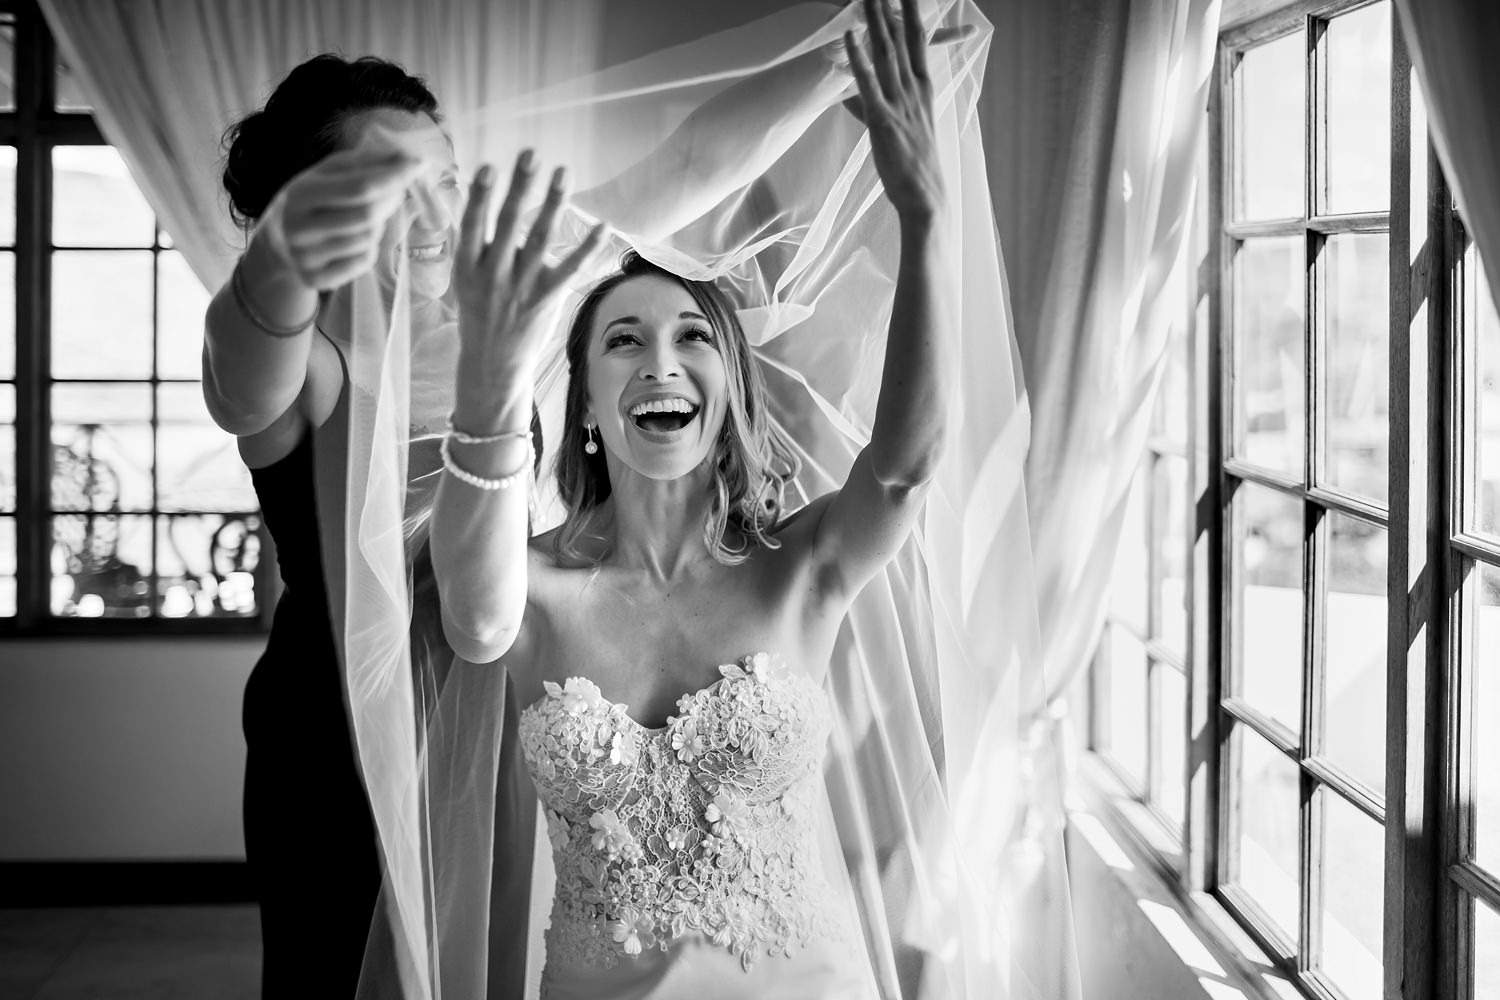 Niki M, a wedding photographer in South Africa, captures an elated bride laughing as her veil is lowered over her face, expressing pure joy at the thought of walking down the aisle and marrying her fiancé